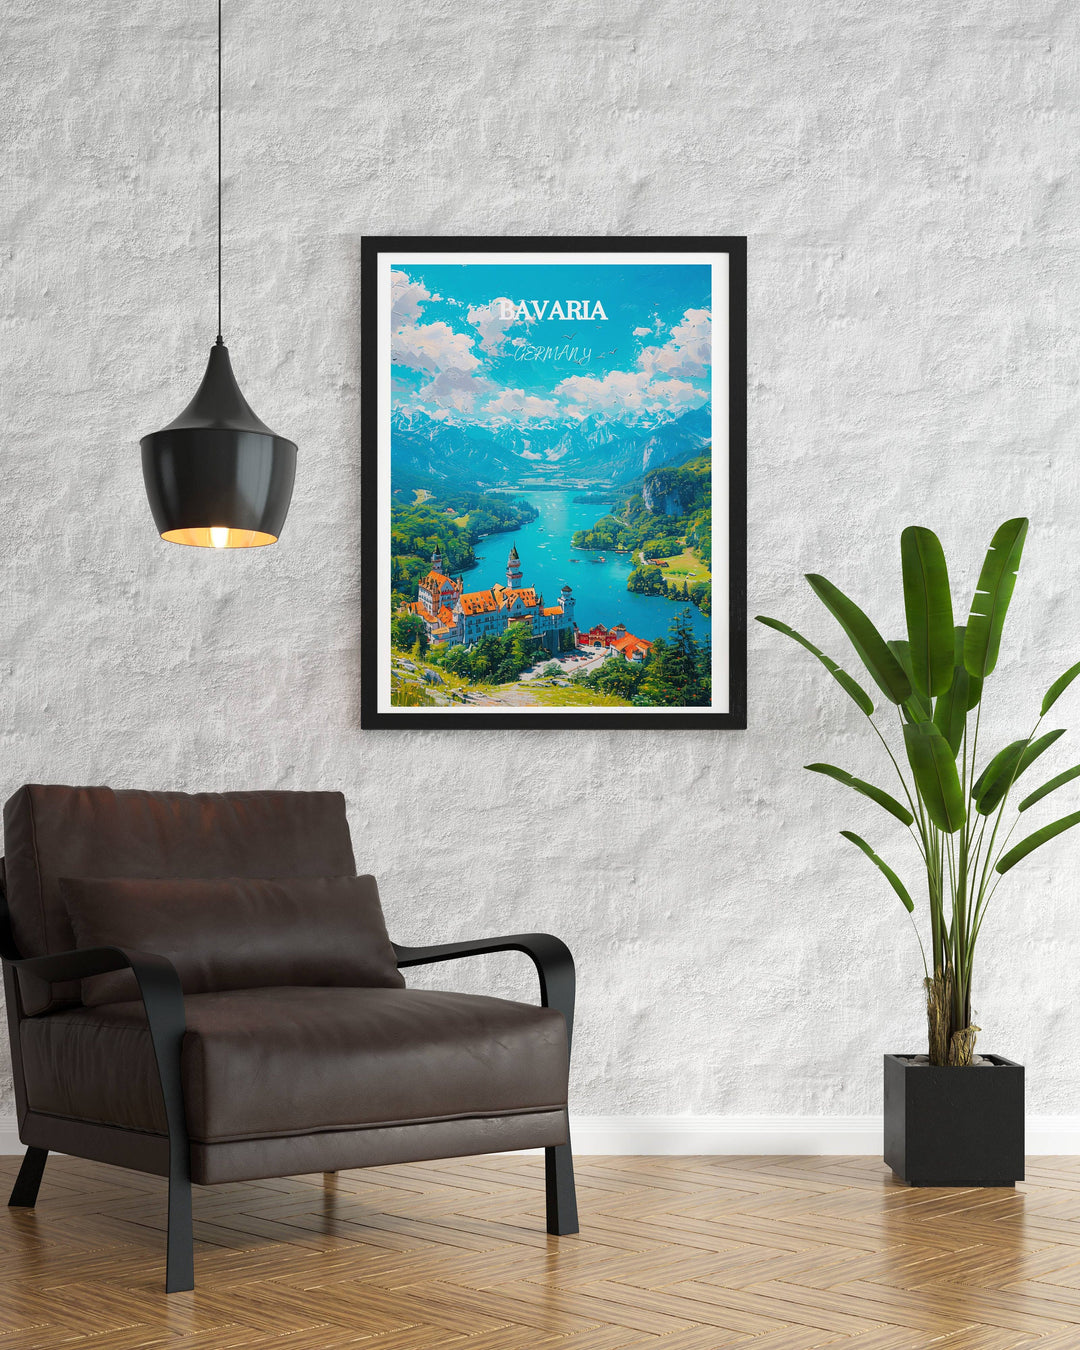 Germany travel illustration featuring Bavarian Alps and Neuschwanstein Castle. Perfect souvenir or home decor accent.